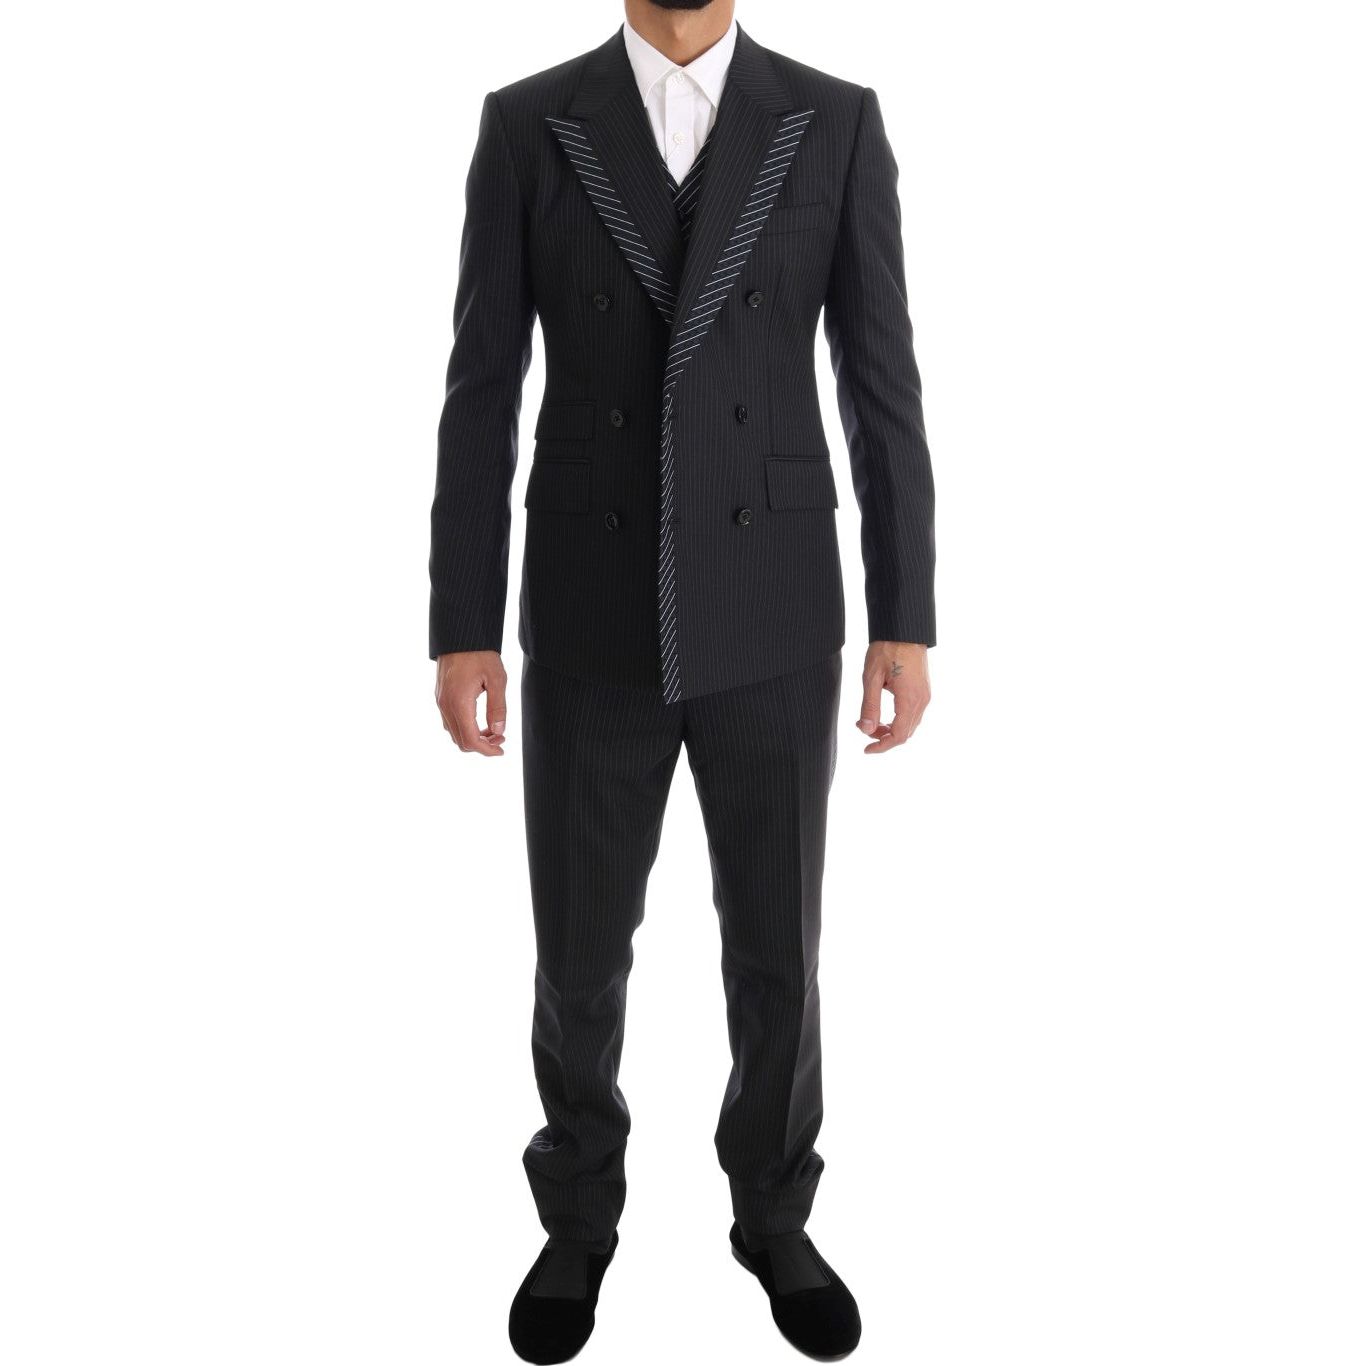 Dolce & Gabbana Elegant Gray Striped Wool Silk Men's 3-Piece Suit Suit gray-double-breasted-3-piece-suit 460447-gray-double-breasted-3-piece-suit-5.jpg